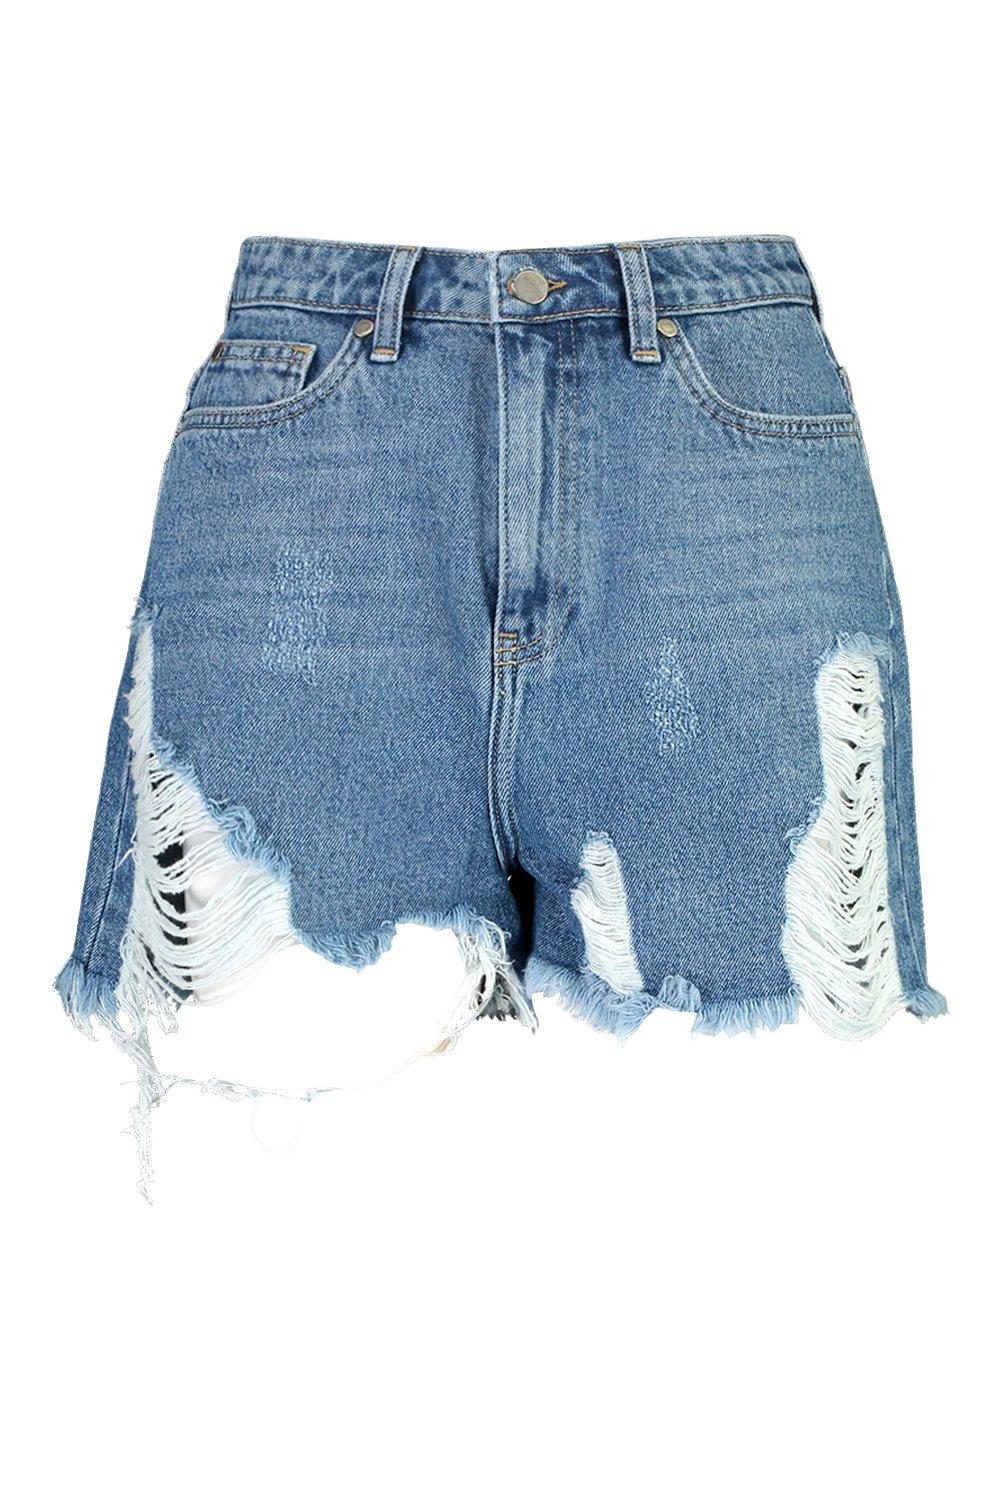 distressed booty shorts